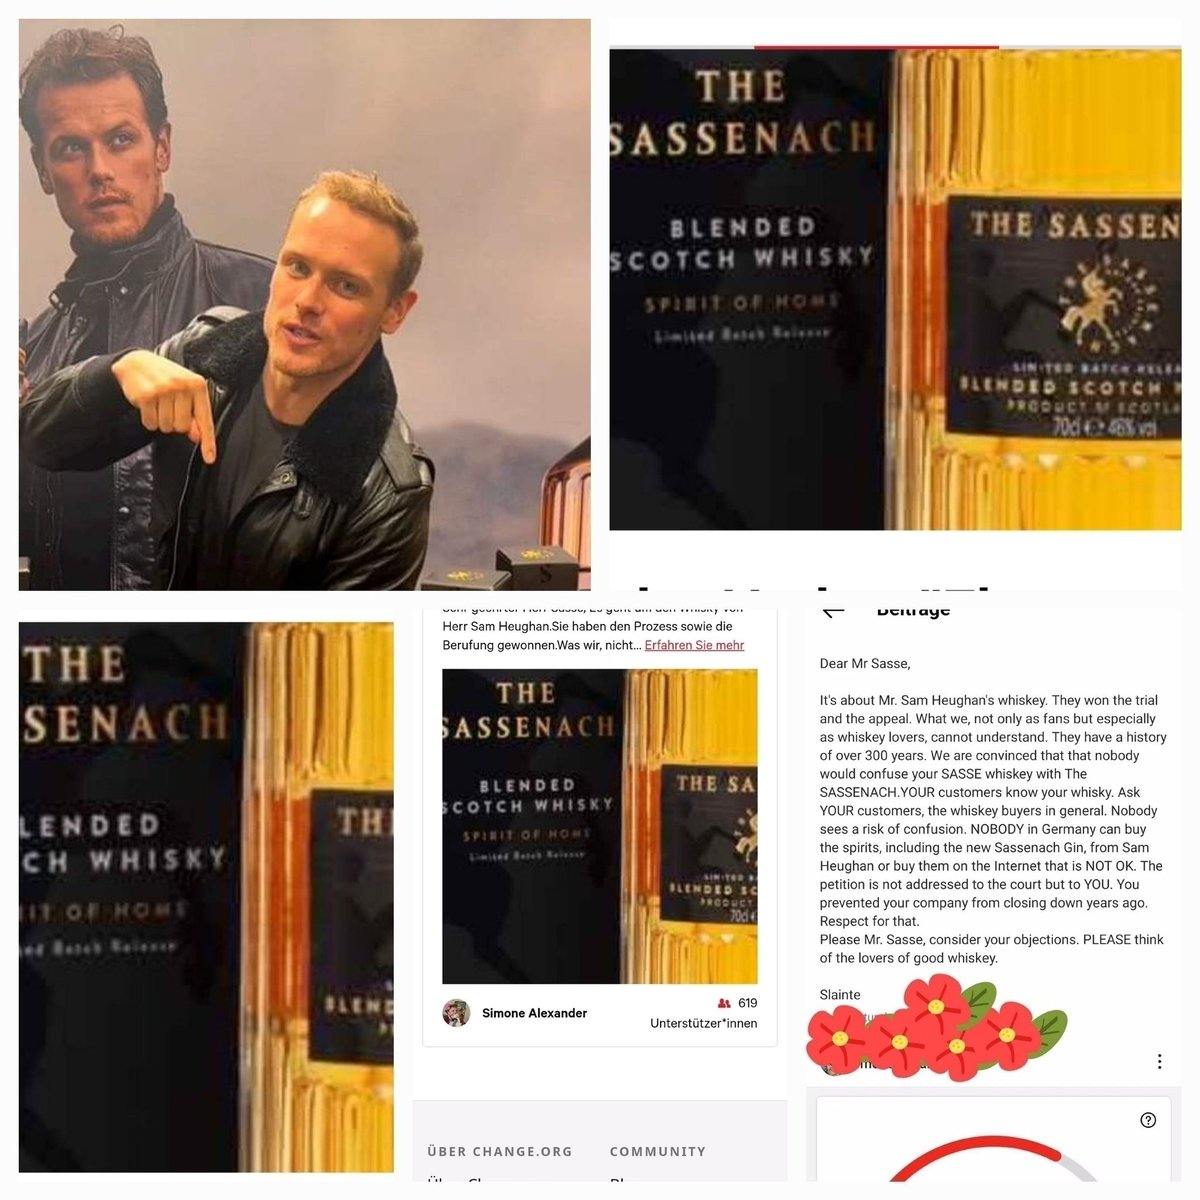 chng.it/vG6sPV7gtf #SamHeughan @SamHeughan @RealAlexNorouzi @SassenachSpirit #SassenachGin 🚩WE STAND BY 624 SIGNATURE🚩 Sam's Sassenach for ALL.We going little Steps.THANKS 🫶PLEASE keep going, we still need every vote.FOR SAM,SHARE and when you like SIGN THX🫶🏴󠁧󠁢󠁳󠁣󠁴󠁿🥃🏴󠁧󠁢󠁳󠁣󠁴󠁿❣️